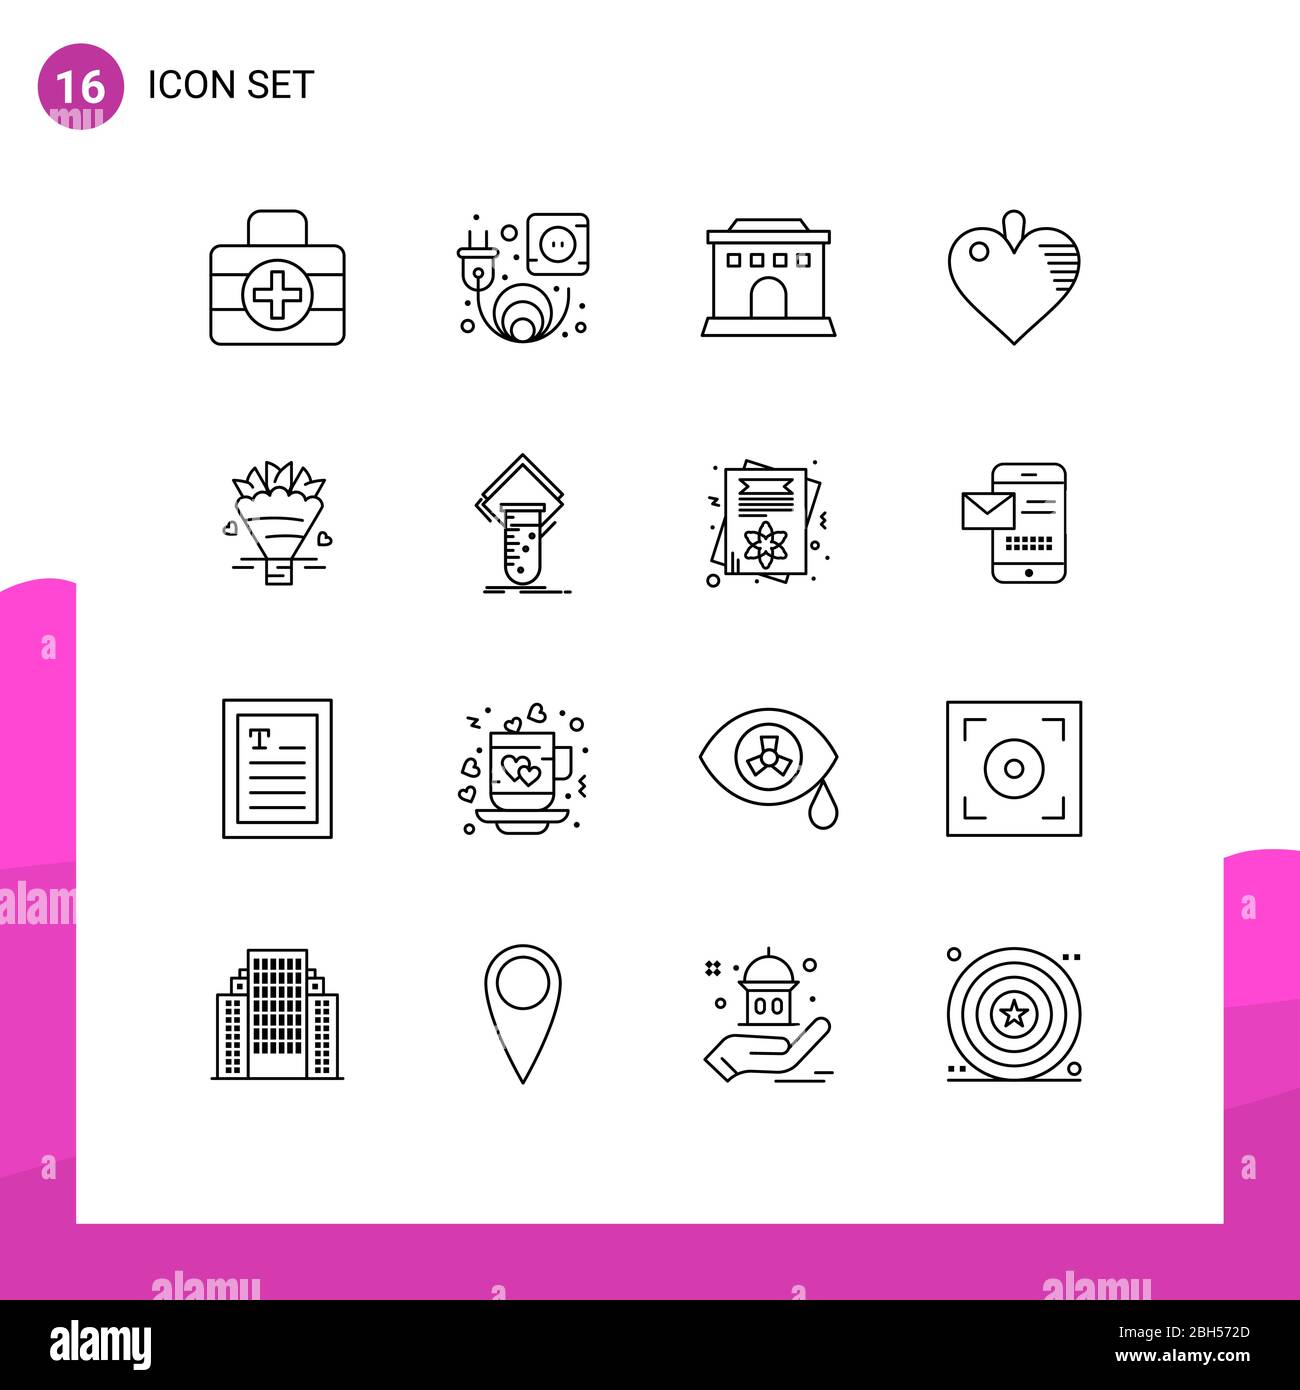 User Interface Pack of 16 Basic Outlines of lab, wedding, home, flowers, beauty Editable Vector Design Elements Stock Vector